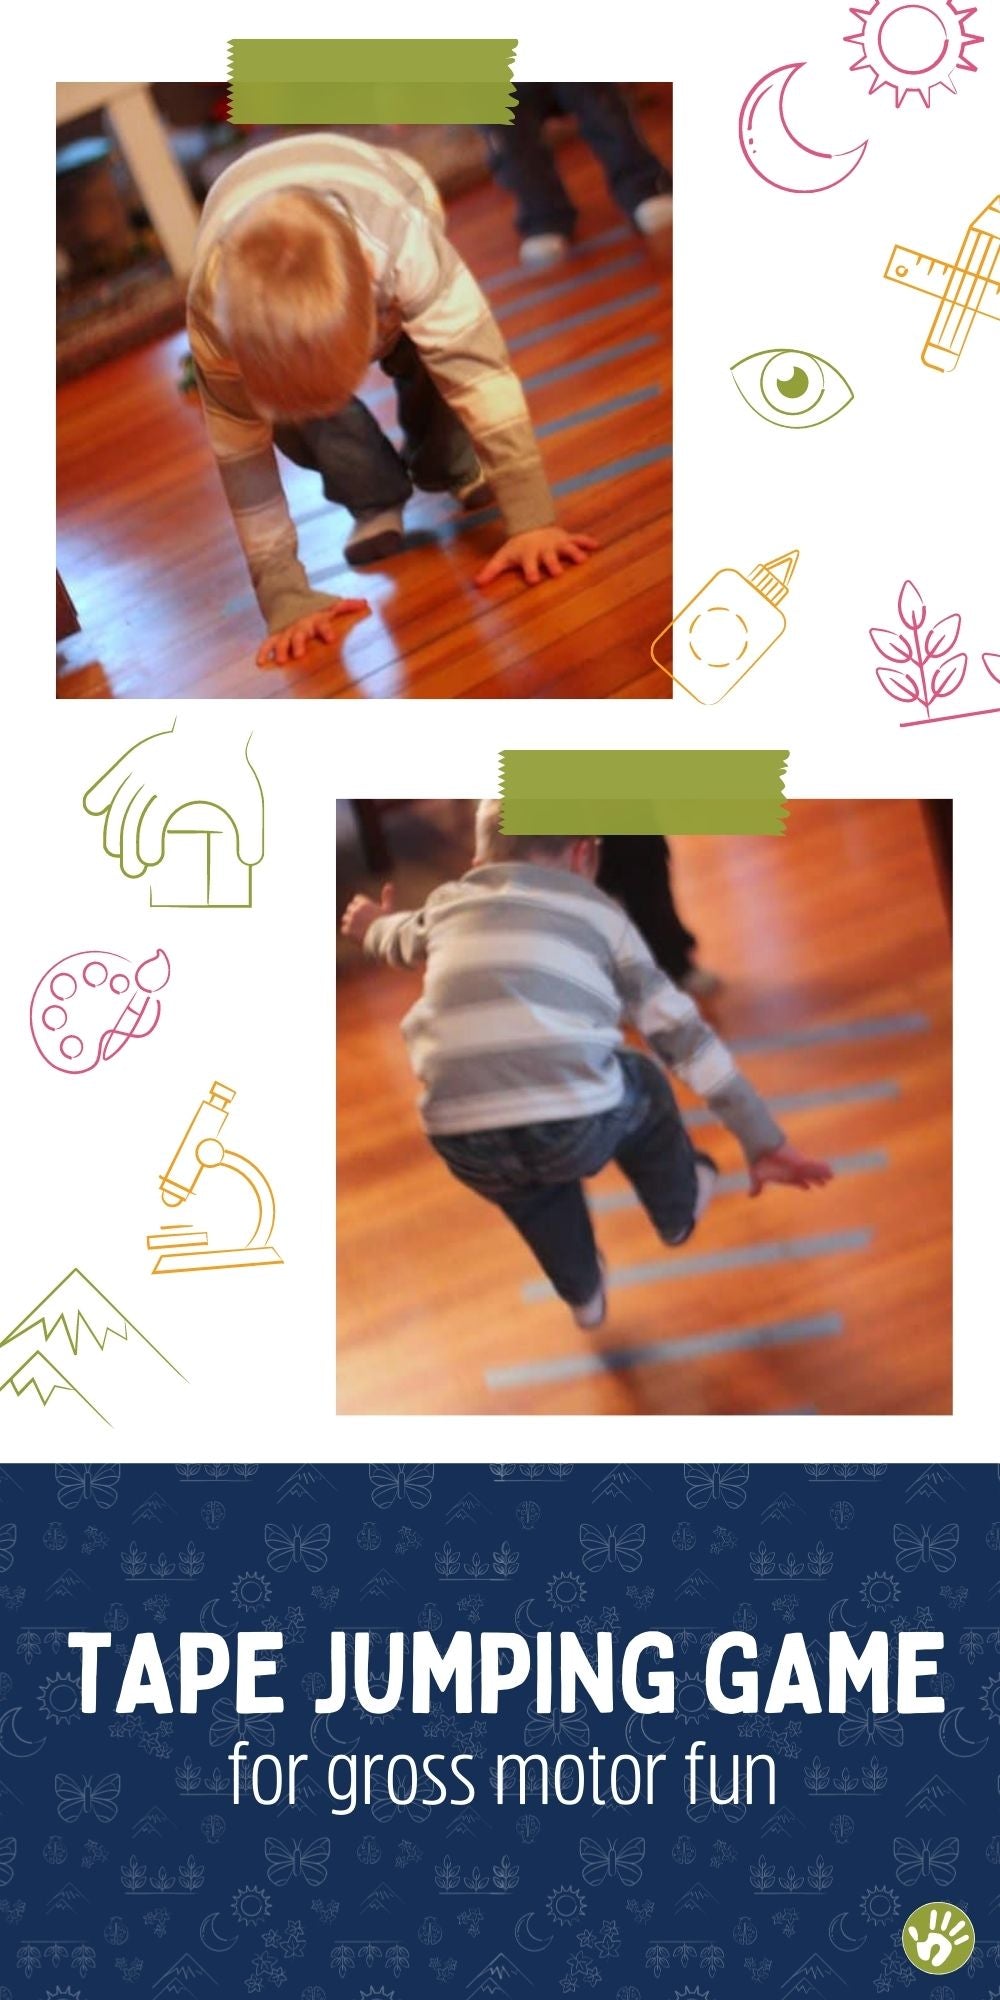 The Active Tape Jumping Game! A Quick Gross Motor Activity for Kids